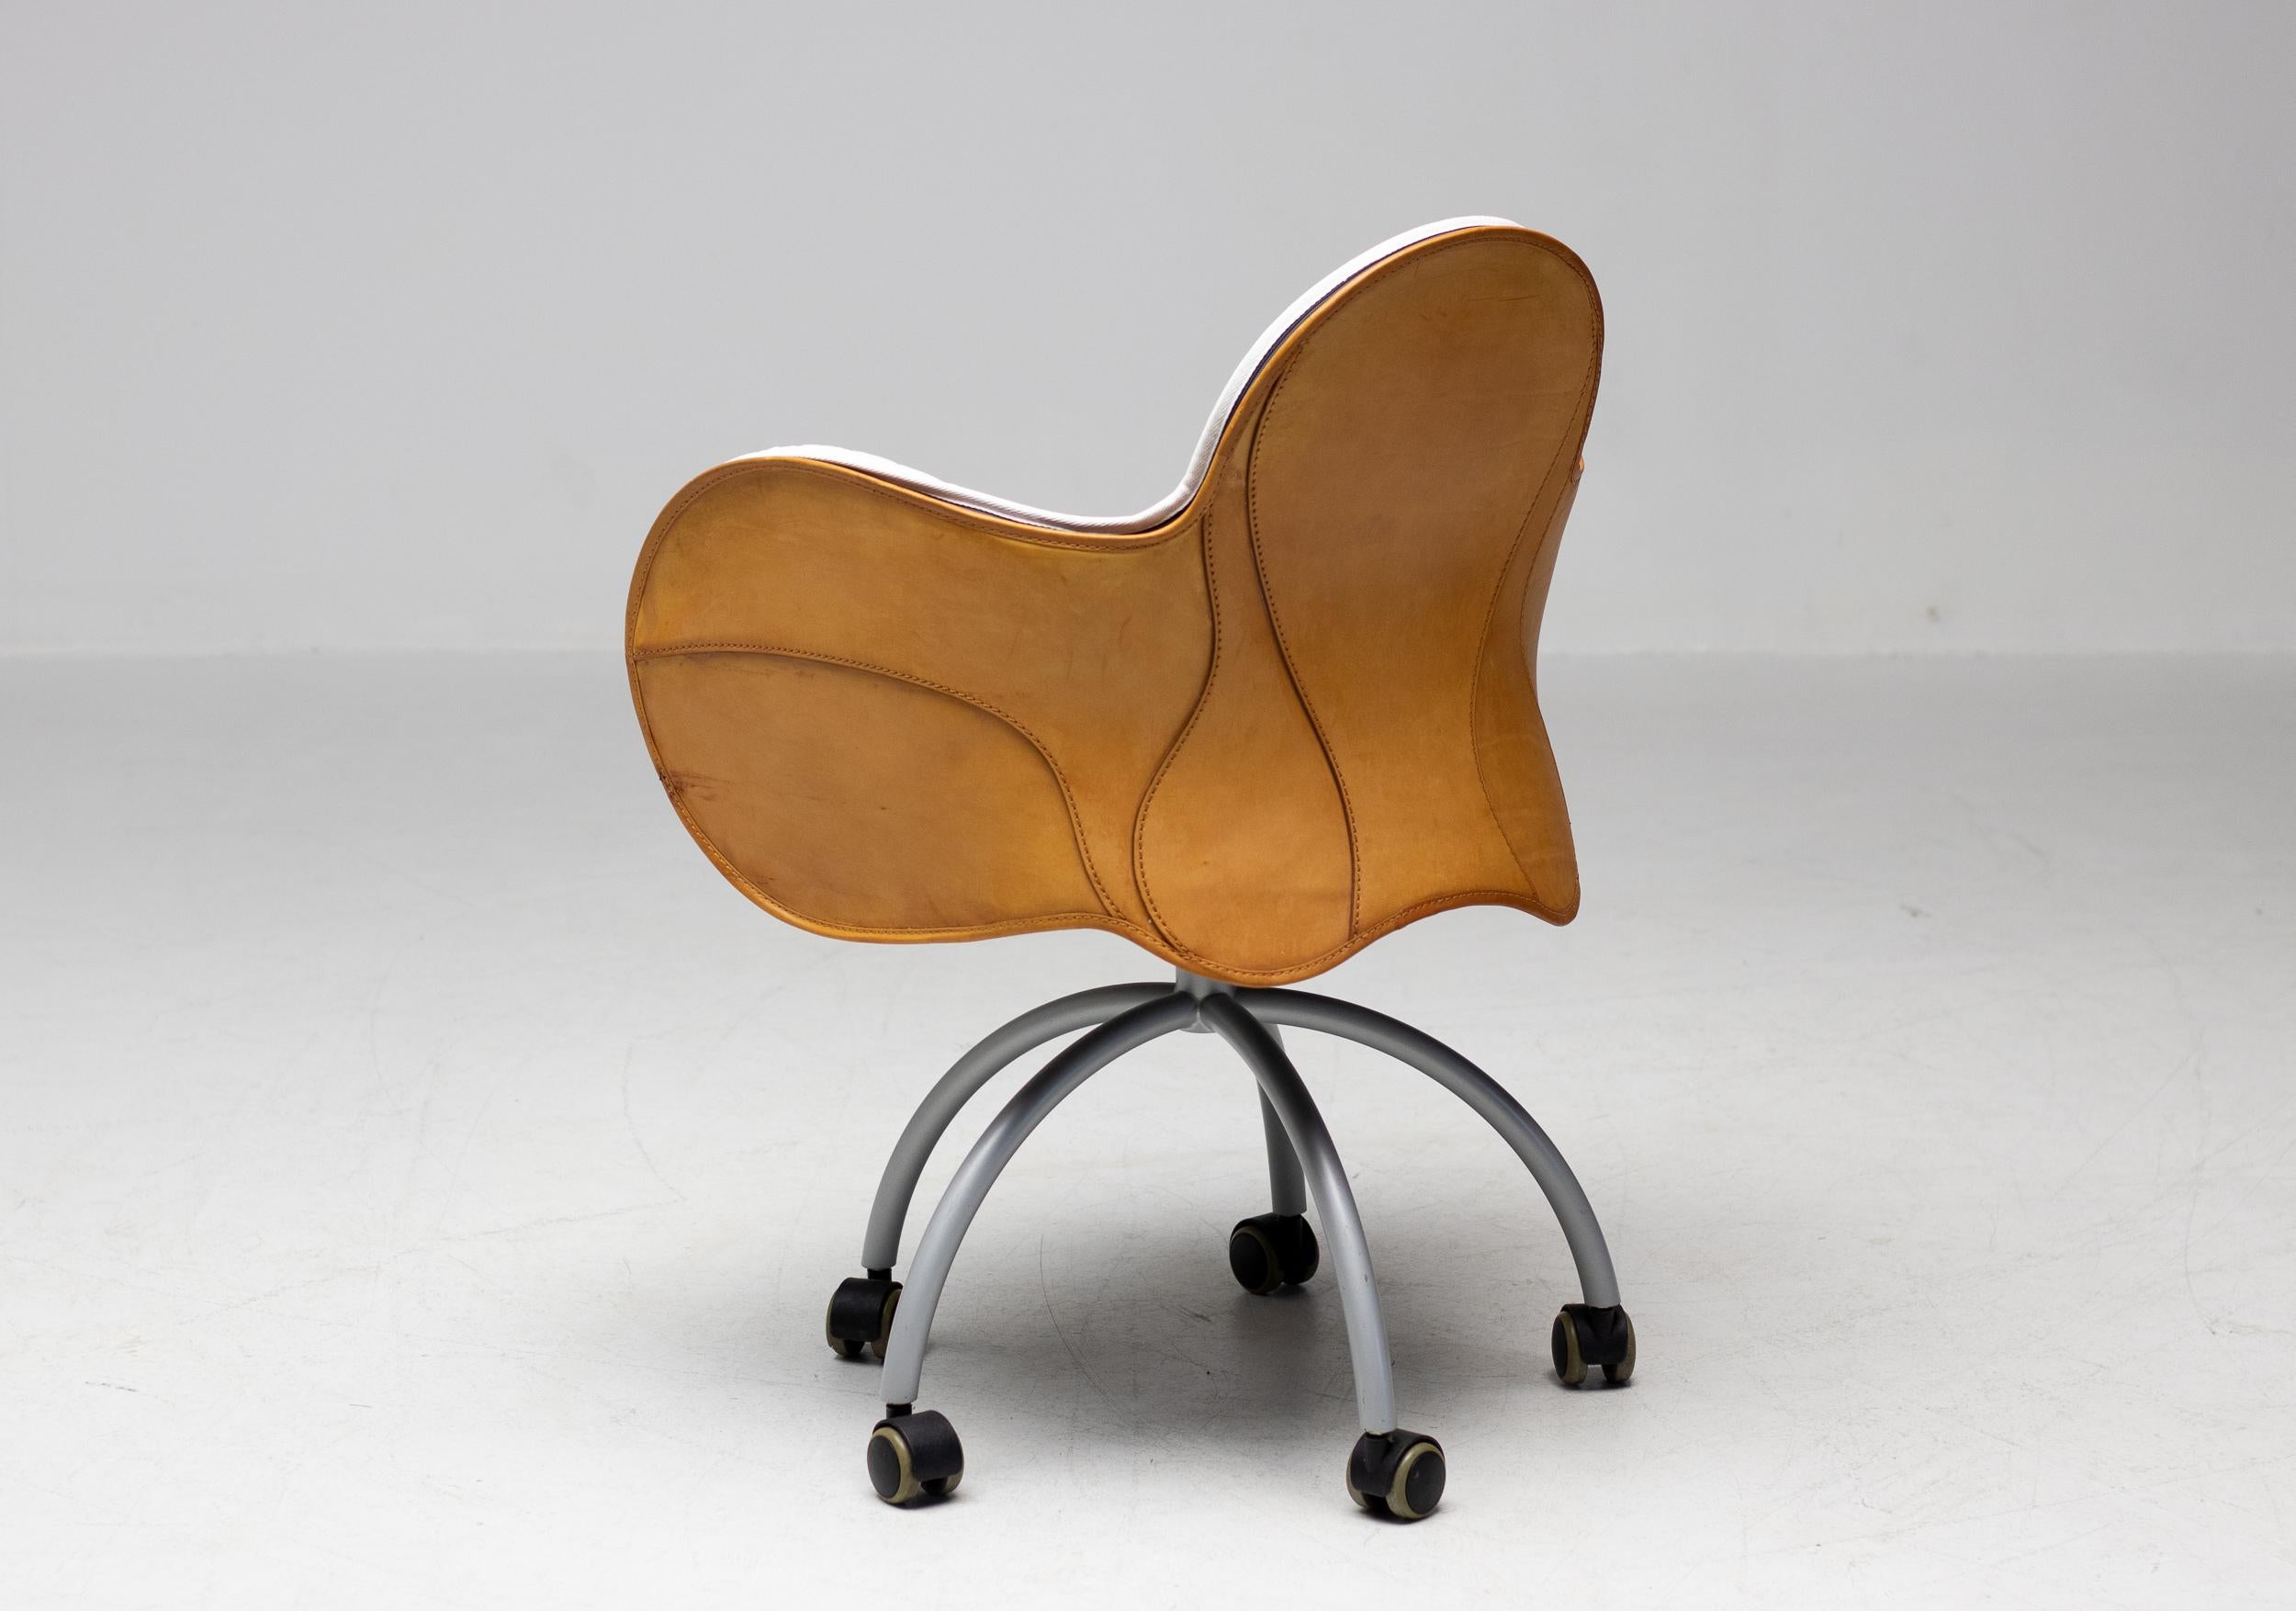 Incisa, designed by Vico Magistretti, is a swivel armchair on wheels with outer cowhide cover, like a saddle. Hand stitching adorns the back and sides, forming soft curves, precious to the touch. The comfortable padded inner covering, with cotton